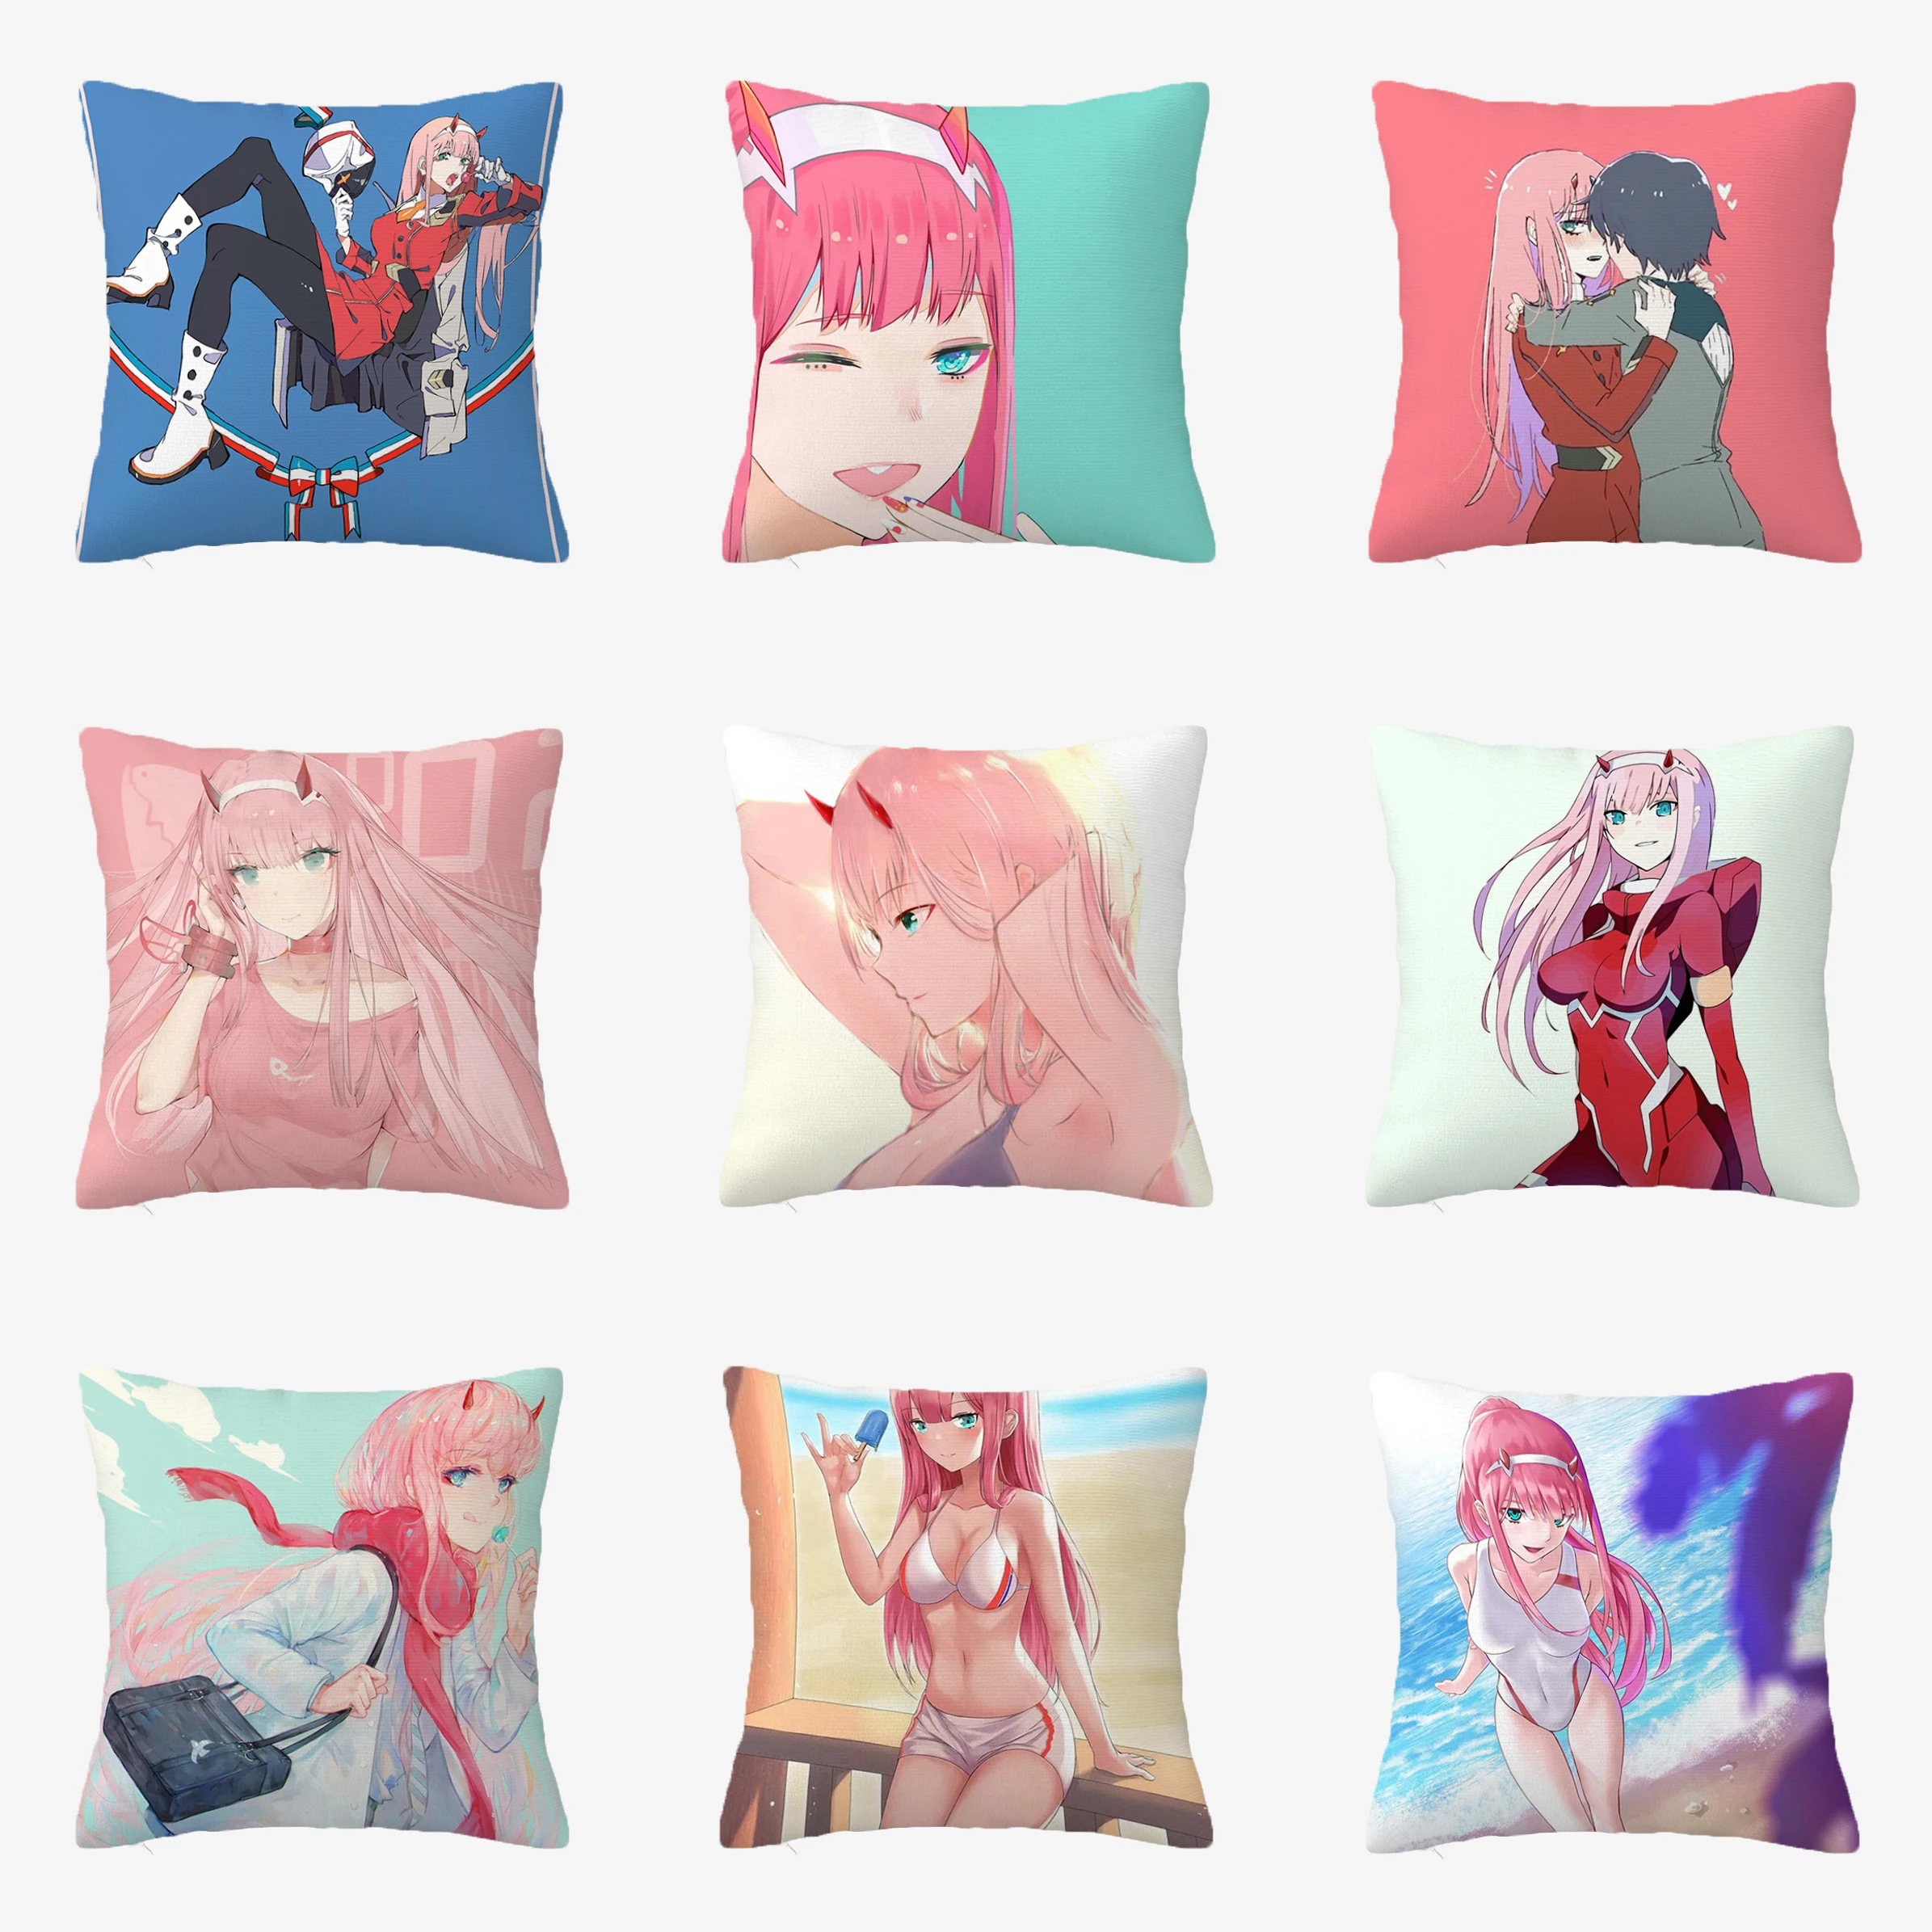 

Double Sided Printing FranXX Anime Pillow Covers for Bed Pillows Decor Home Short Plush Cushion Cover Decorative Pillowcases